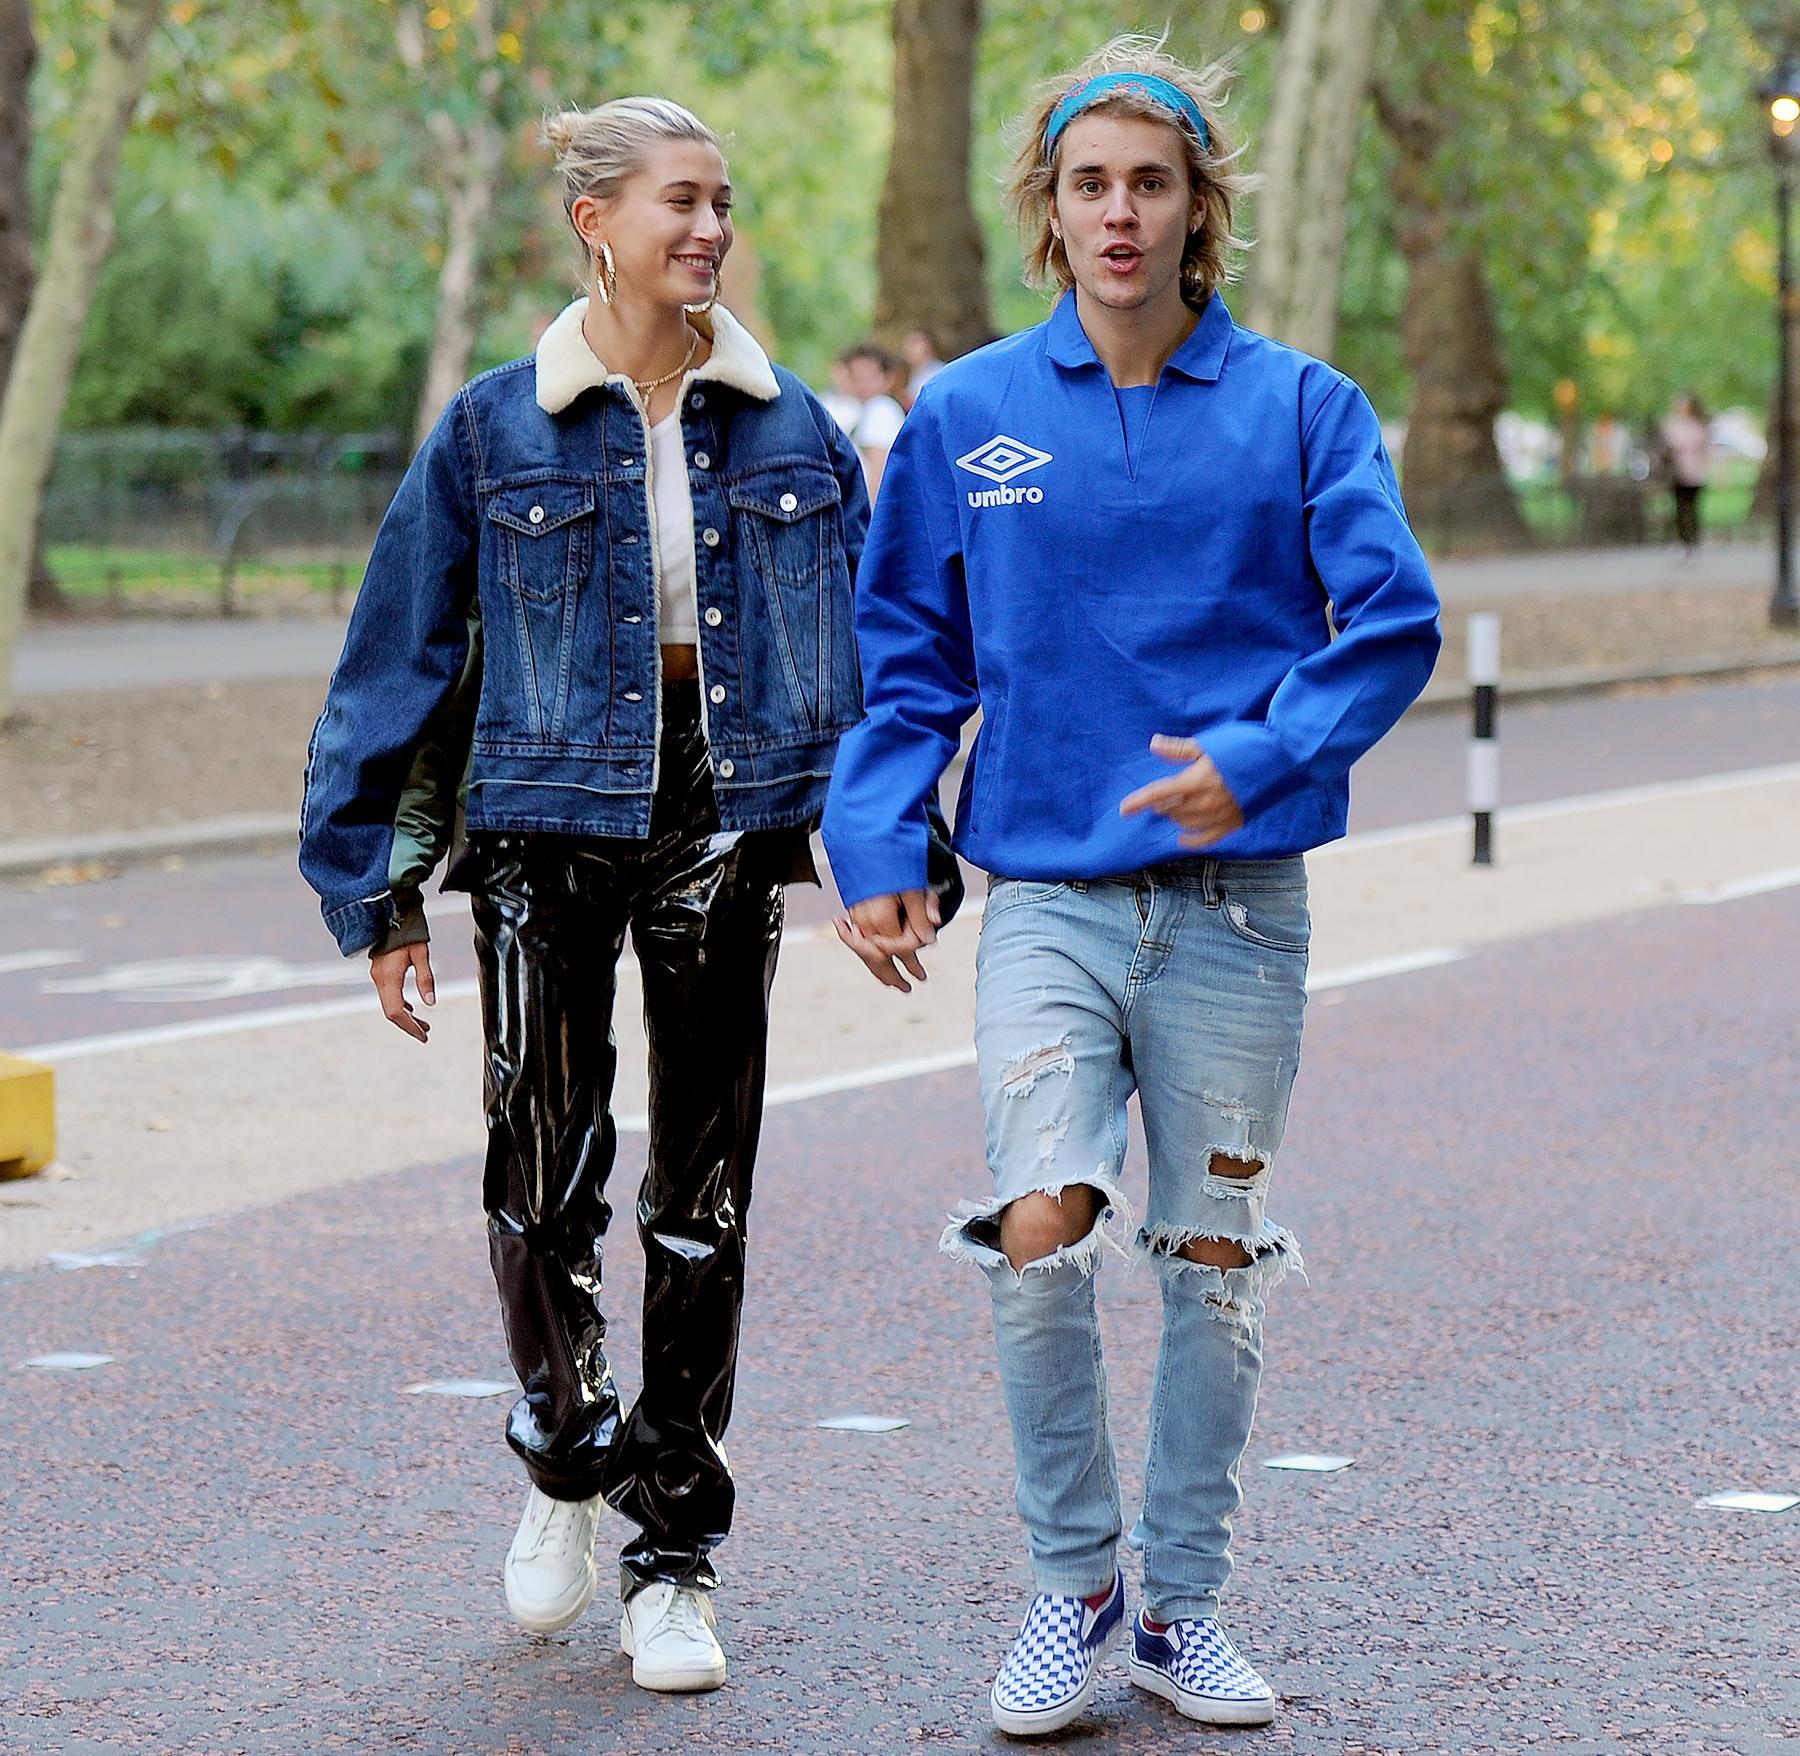 Hailey Baldwin Changes Her Last Name to Bieber on Instagram